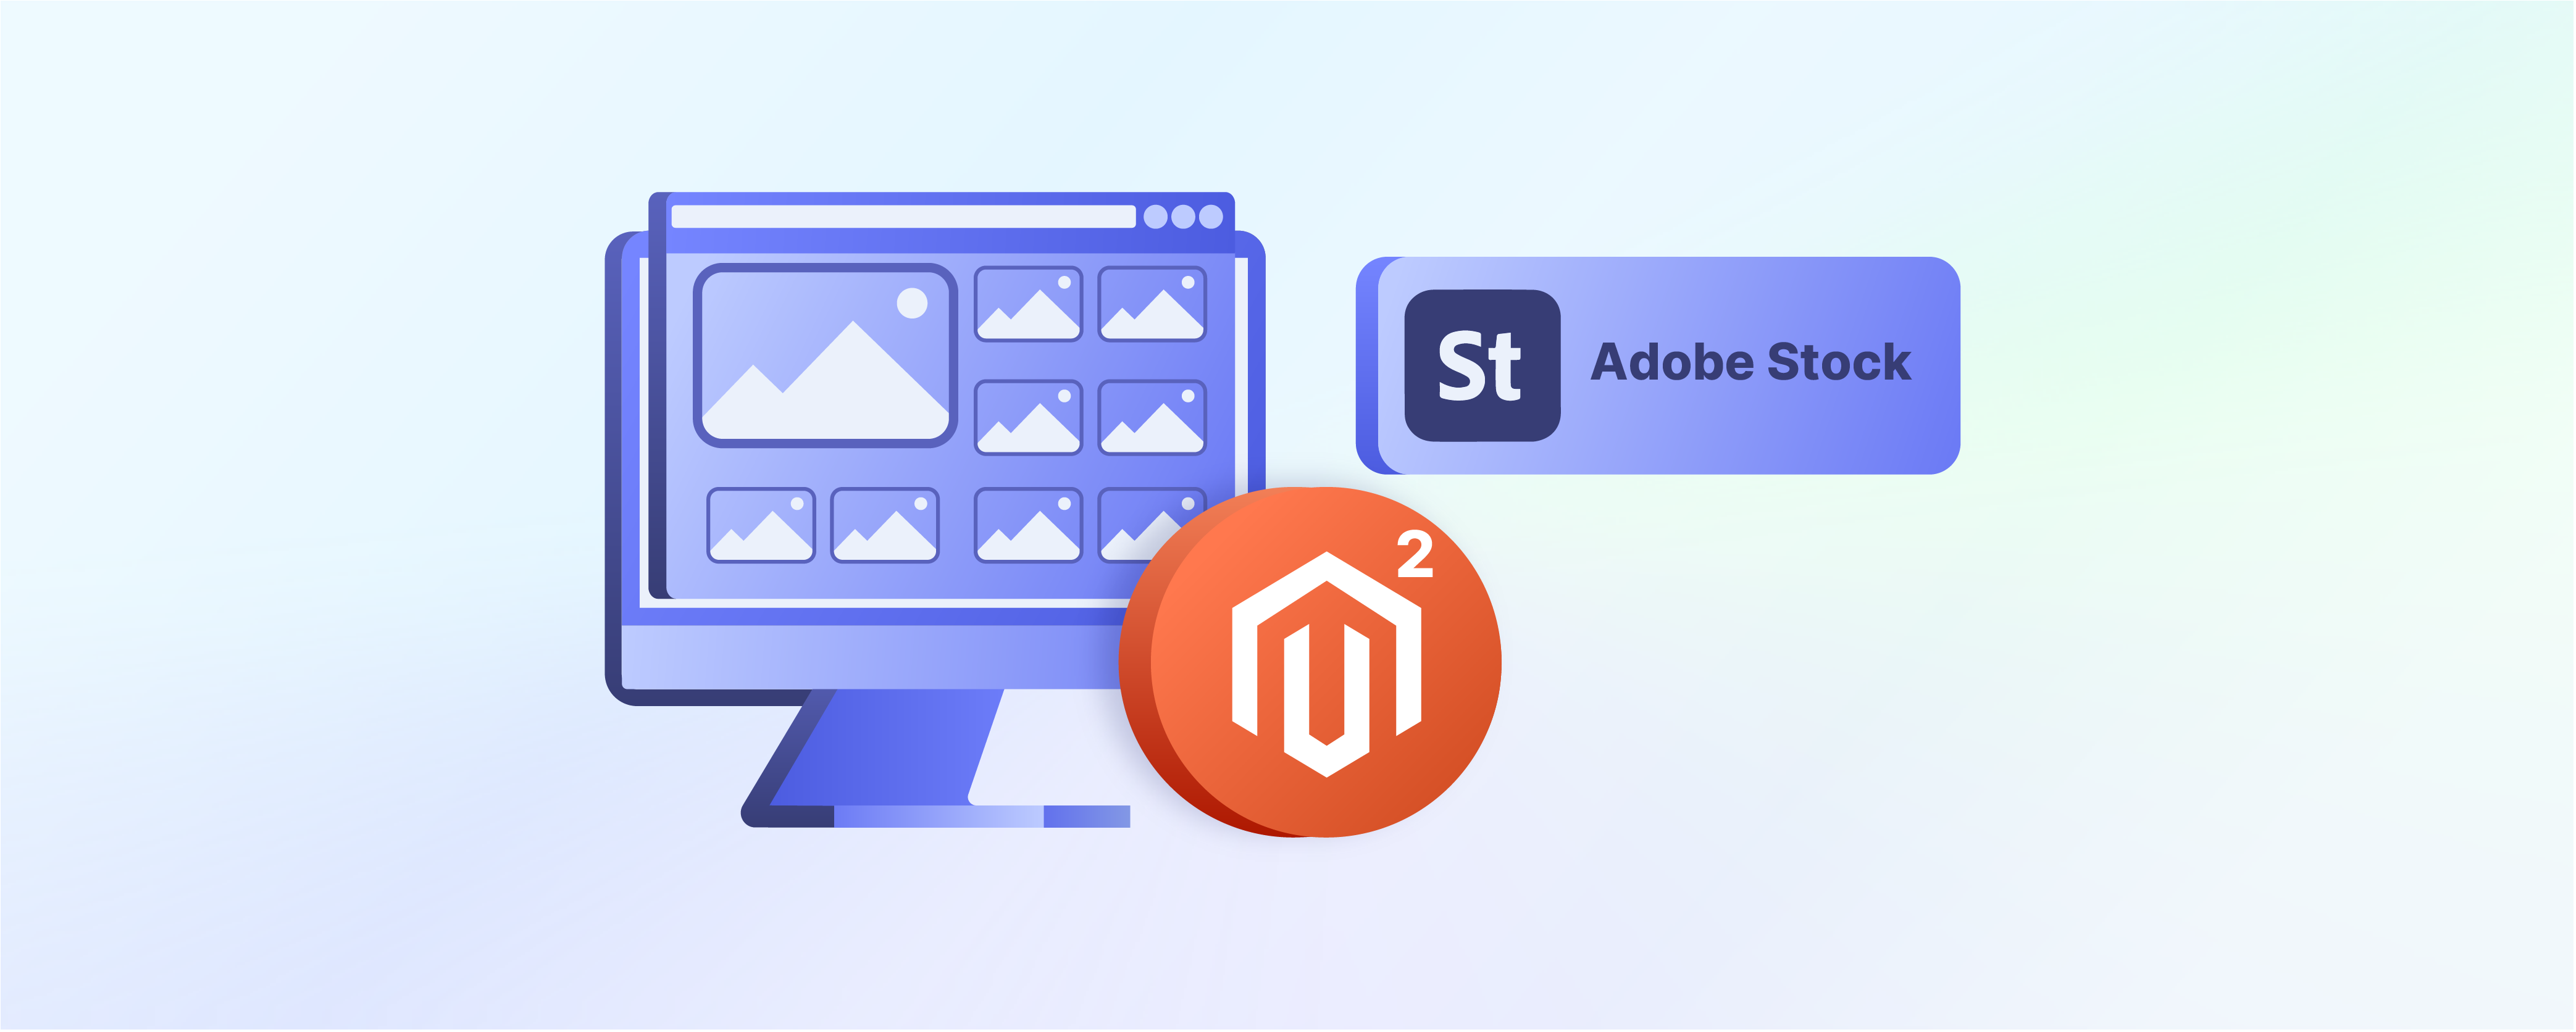 Magento 2 Adobe Stock Integration: Steps to Add Images